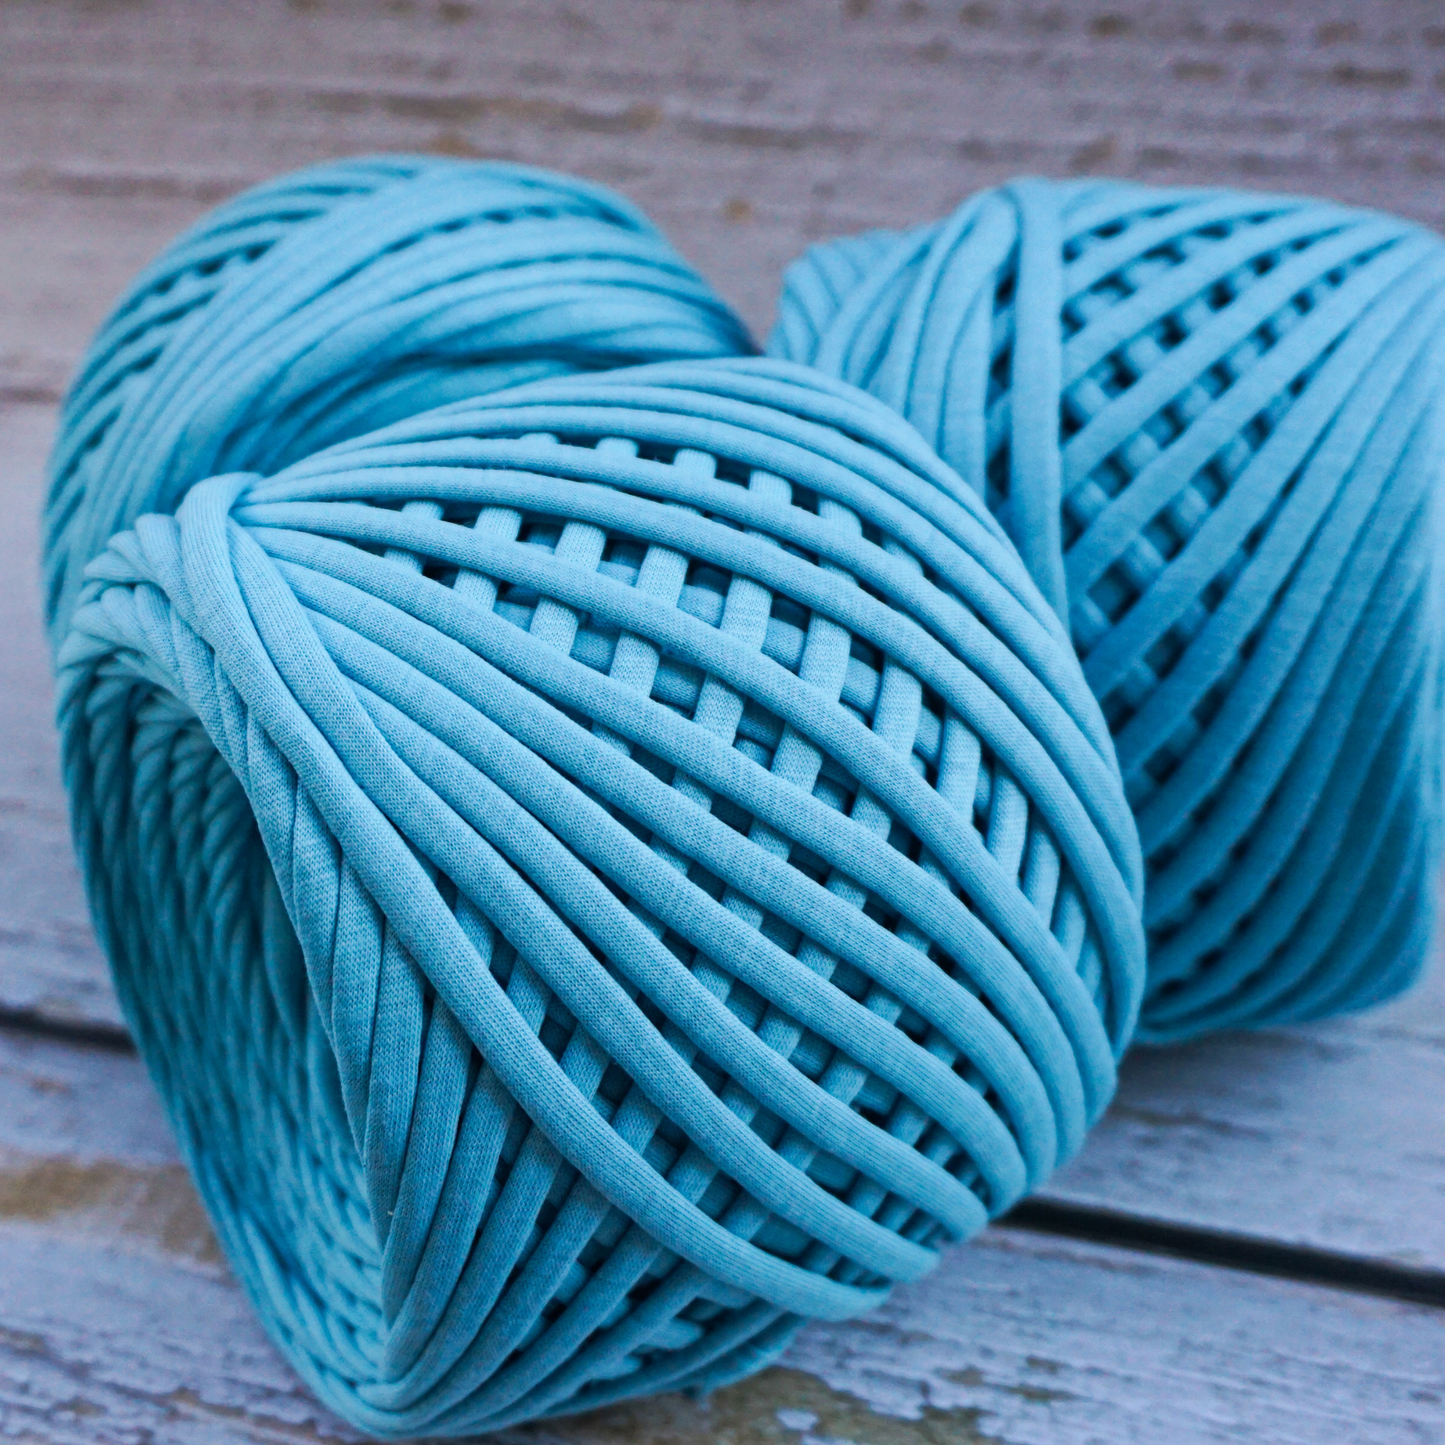 T-shirt yarn for crocheting baskets, bags, rugs and home decor. Ocean weave